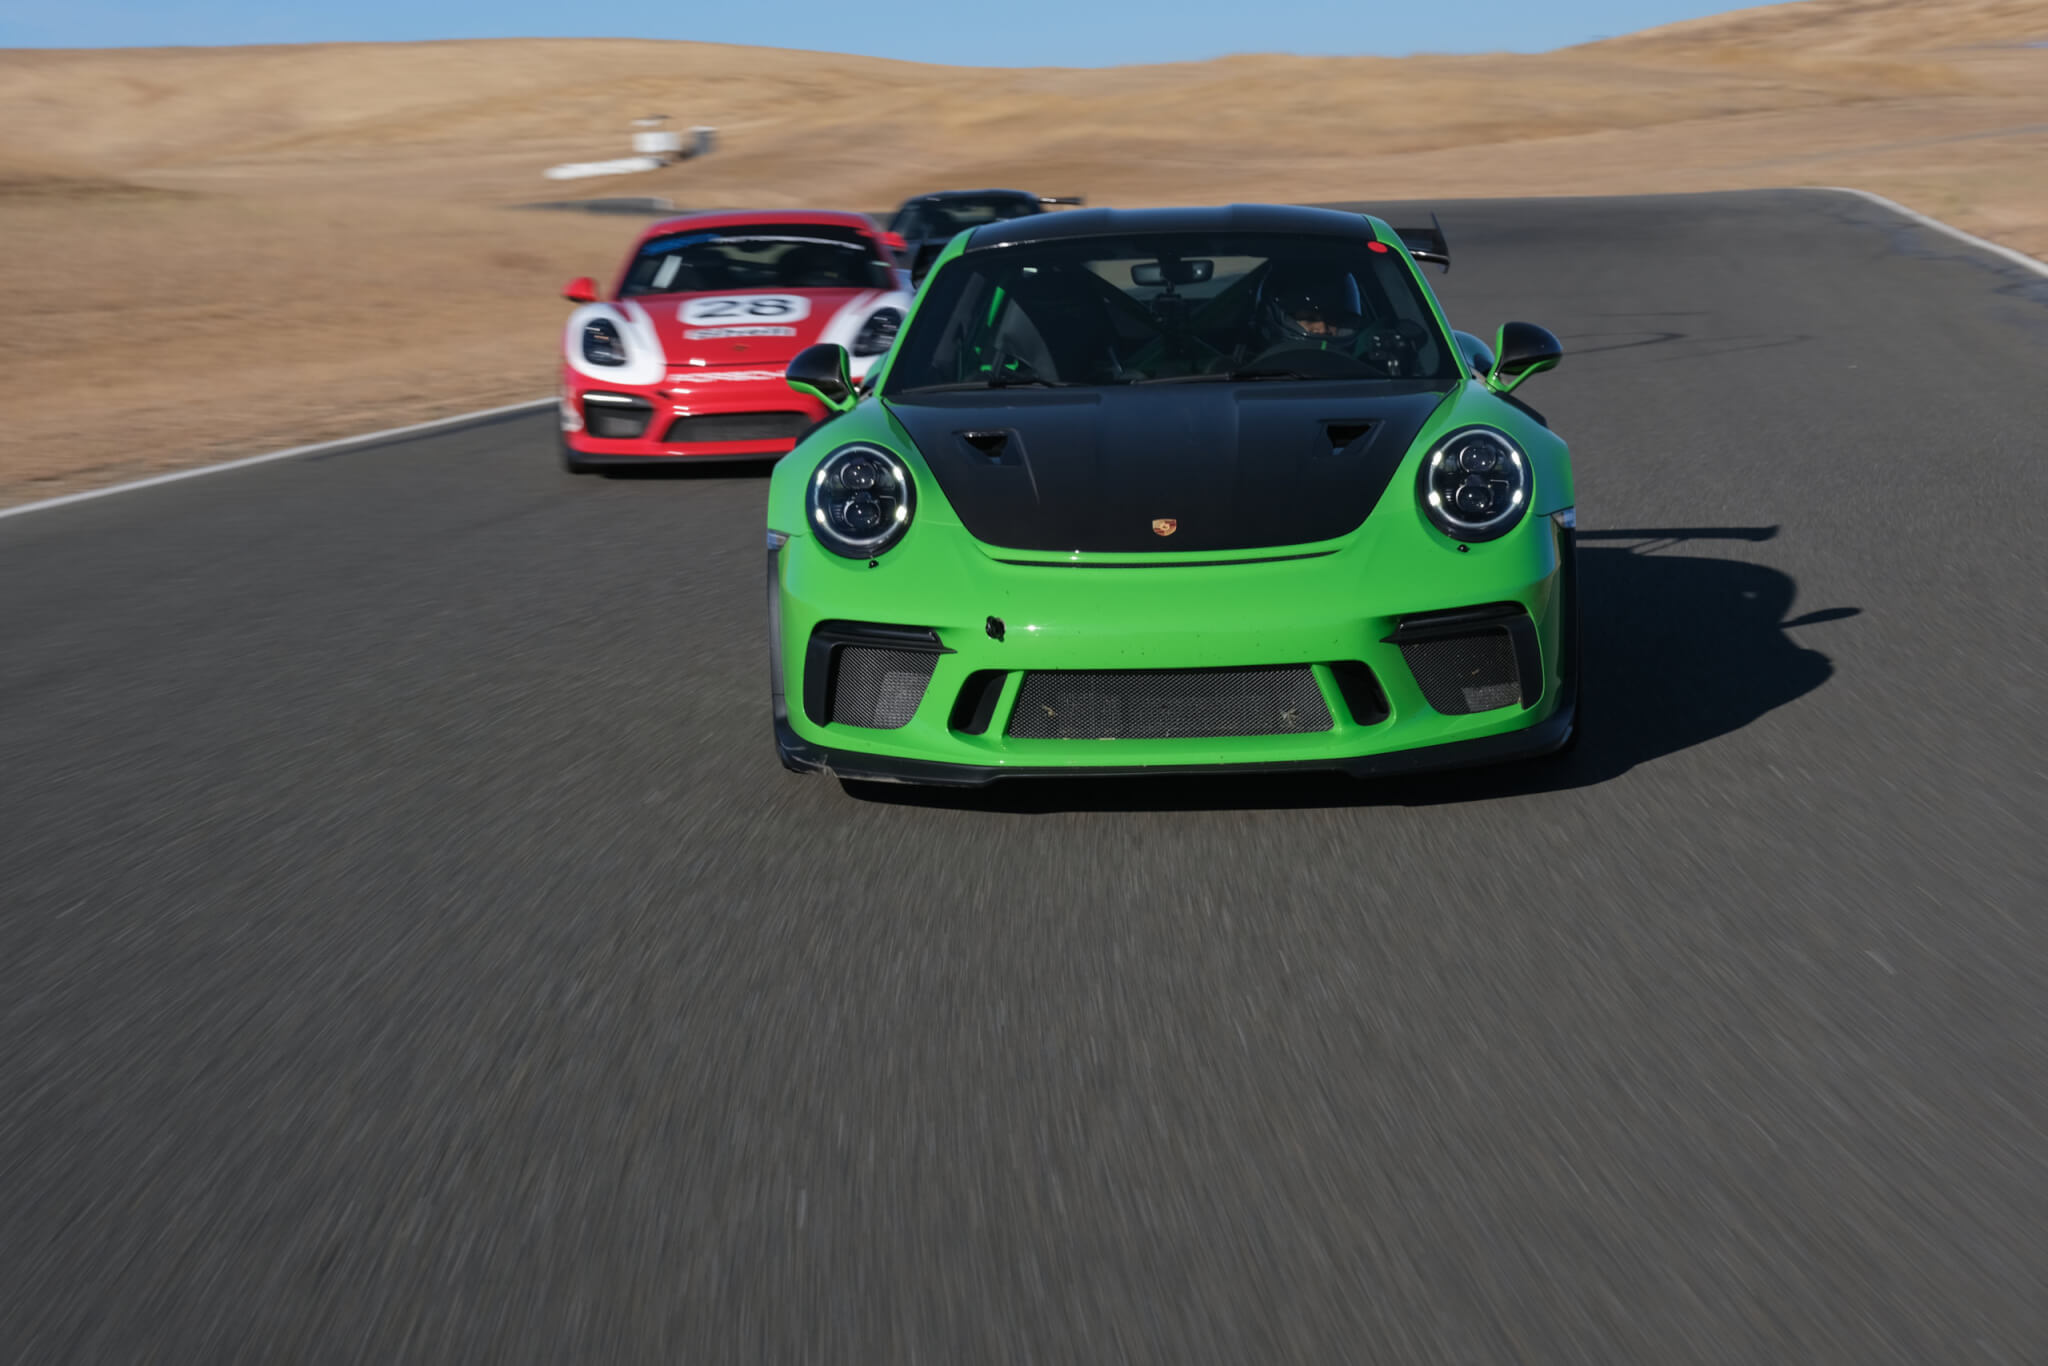 SP Motorsports Arrive and Drive Cars at Thunderhill